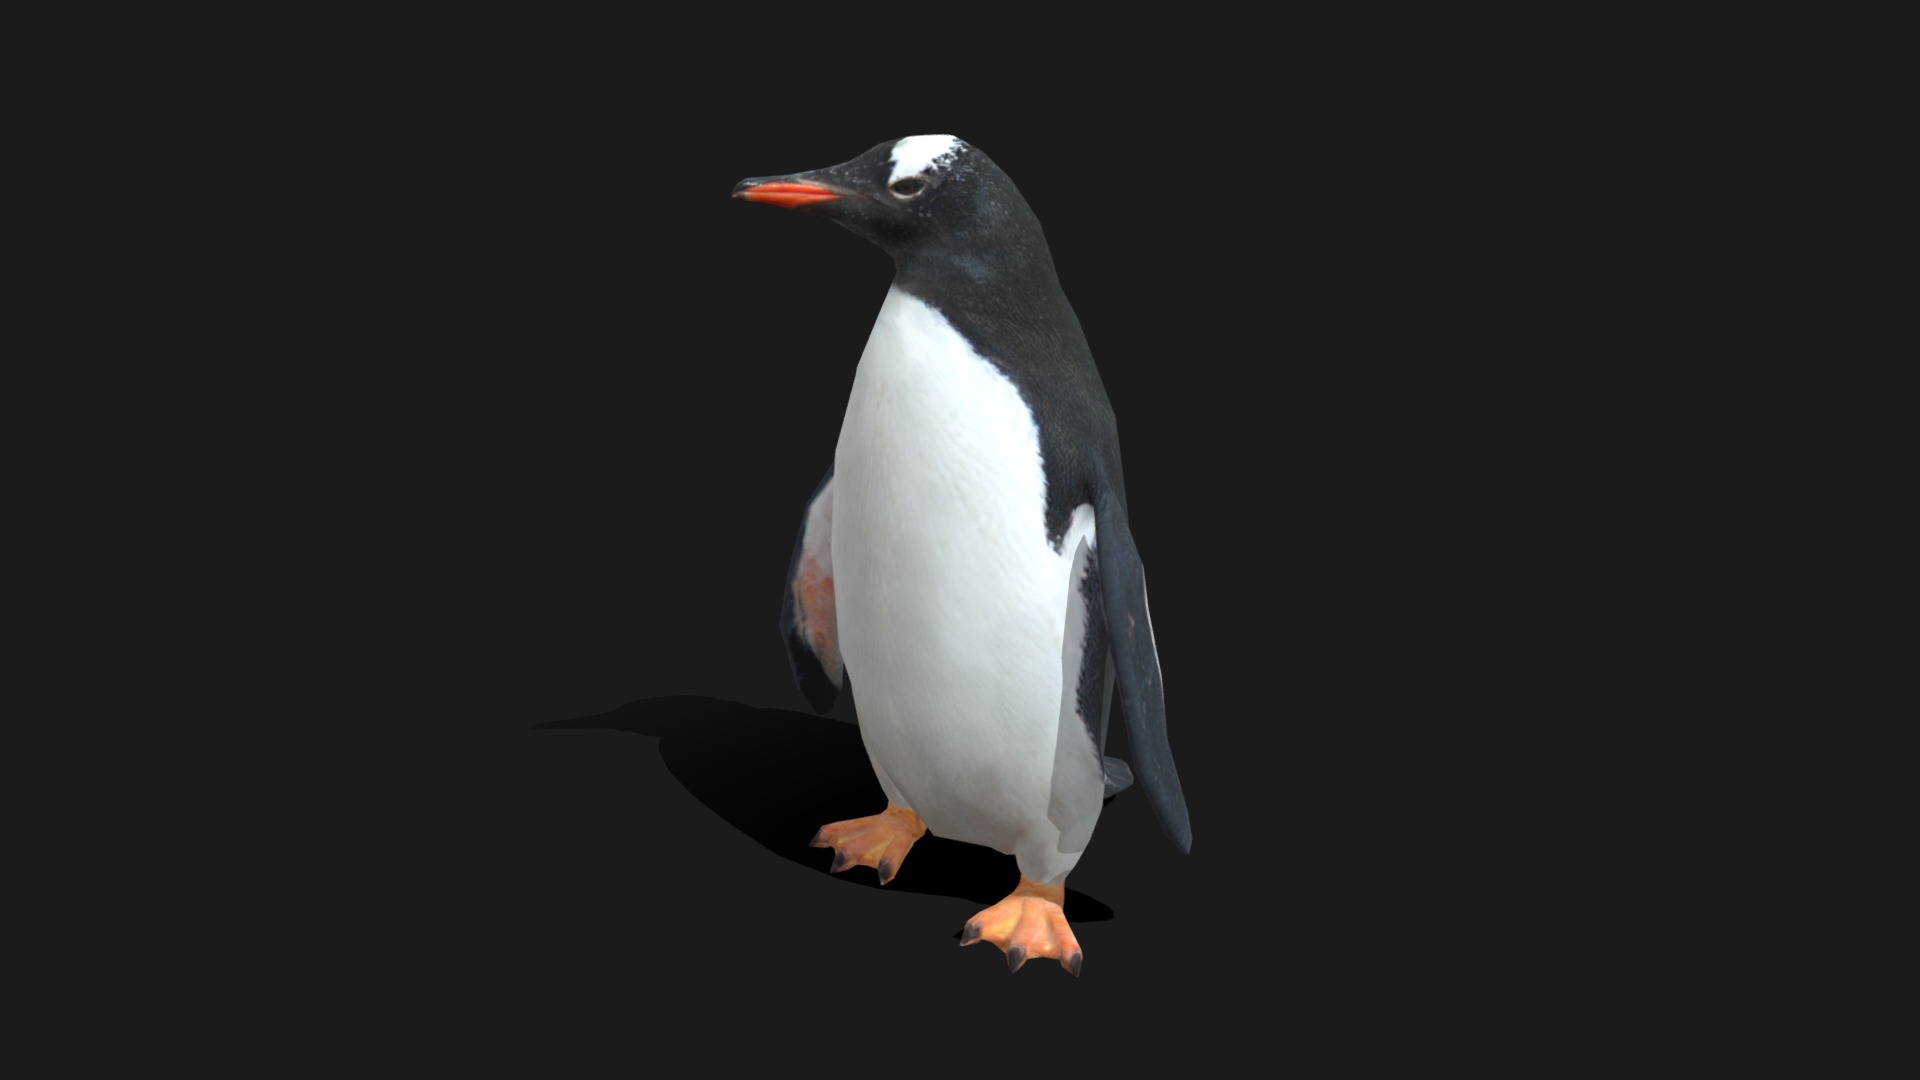 3D model Low Poly Gentoo Penguin - This is a 3D model of the Low Poly Gentoo Penguin. The 3D model is about a penguin standing on a black background.